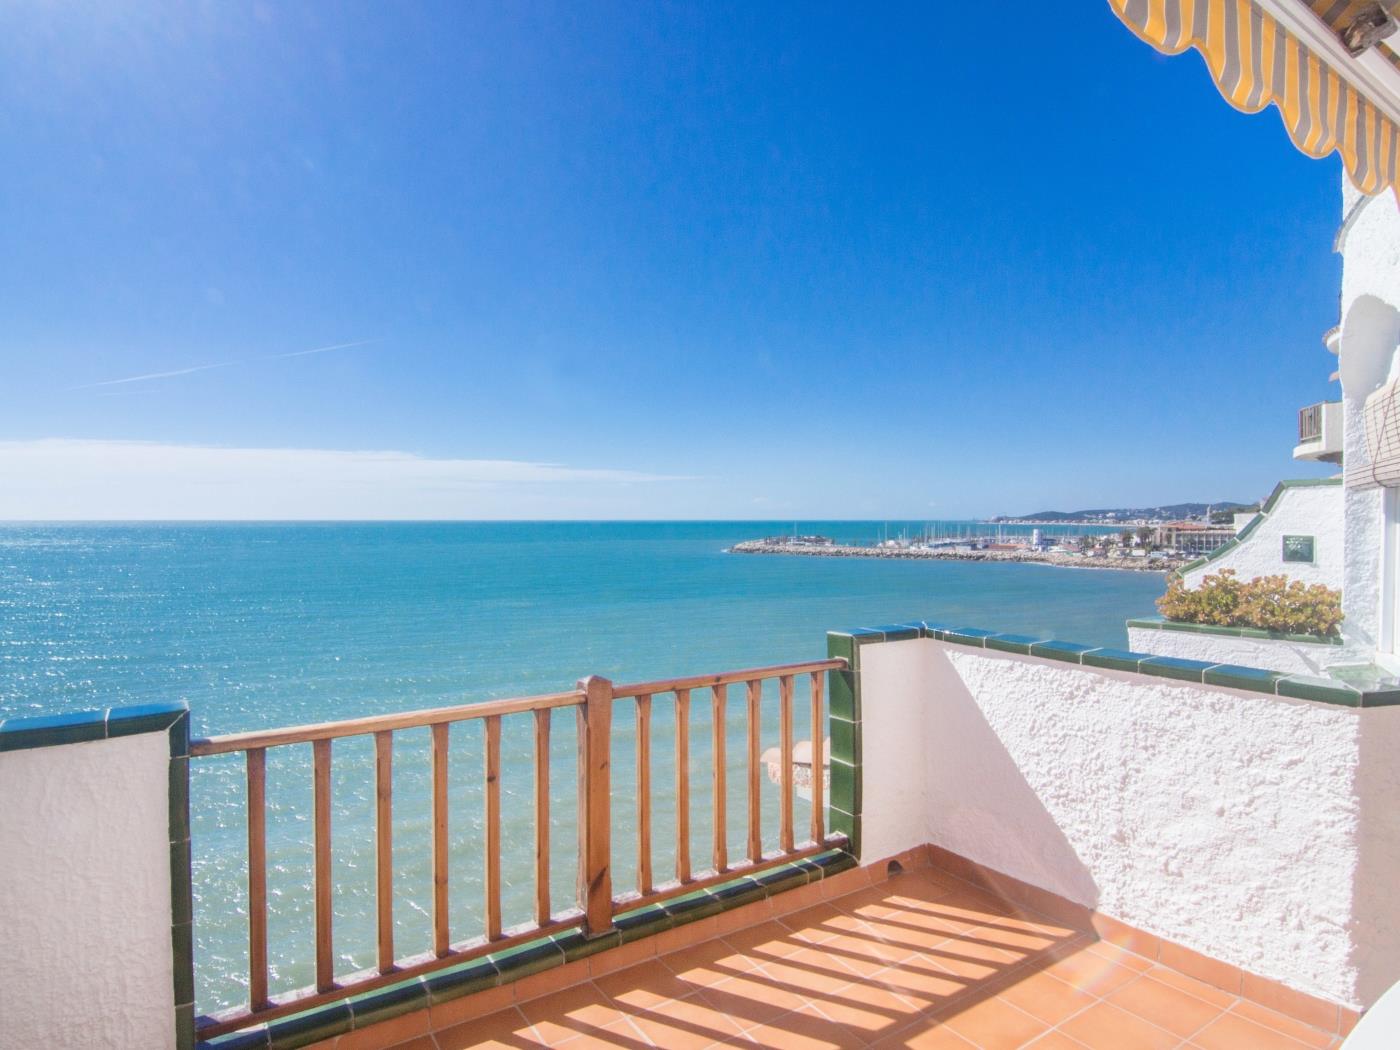 CAPRITX DE MAR BY BLAUSITGES Terrace, pool and wifi over the sea, beautiful view in SITGES